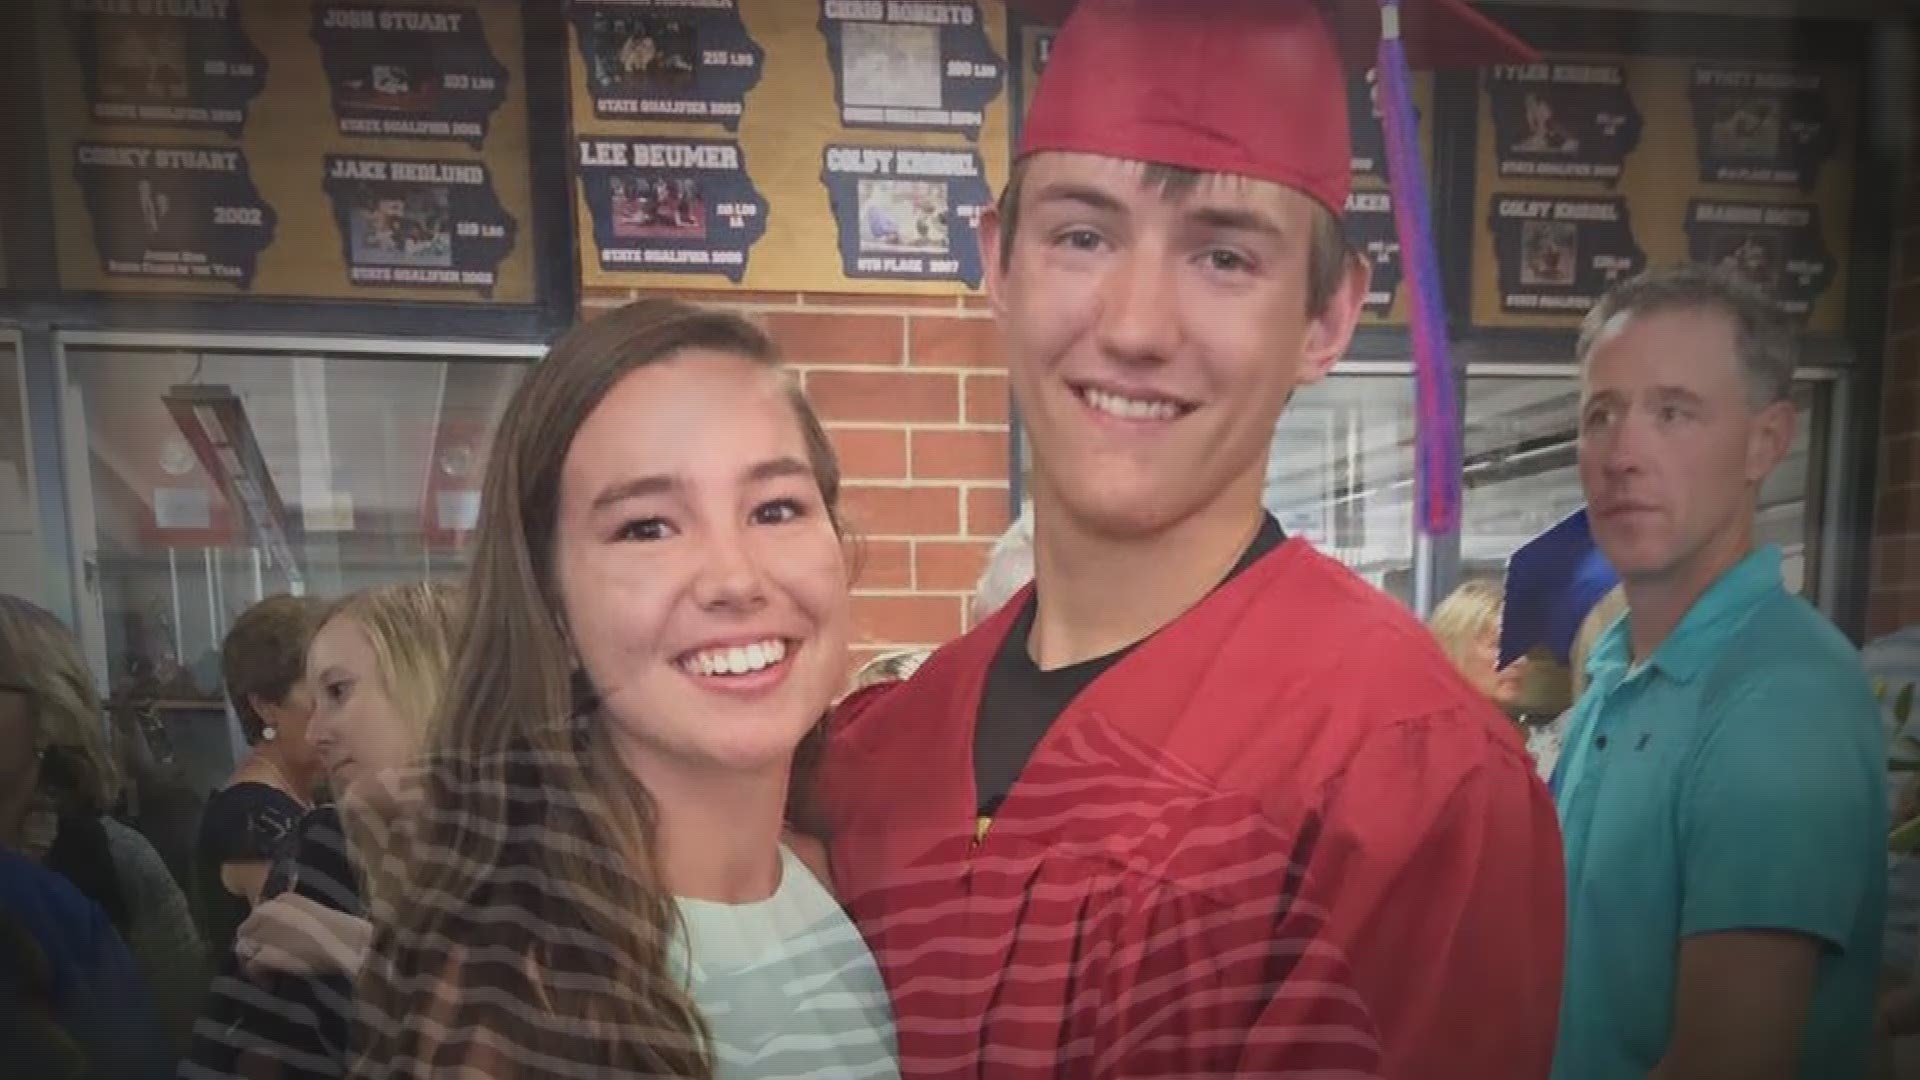 New details are emerging in the case of a missing Iowa student.